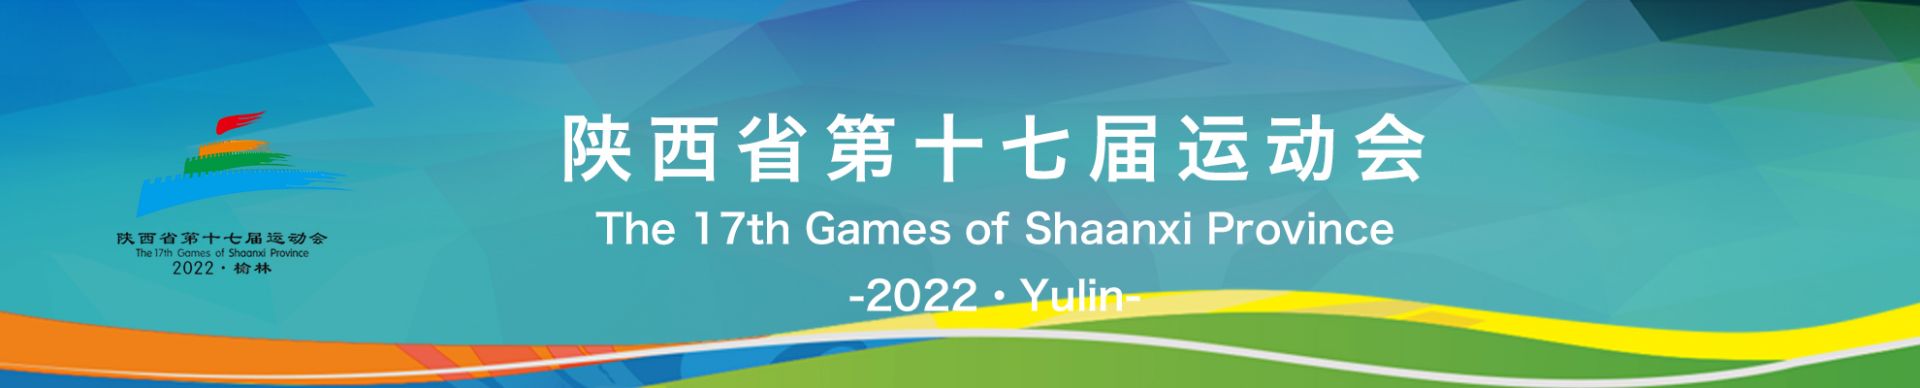 Moments of the 17th Games of Shaanxi Province